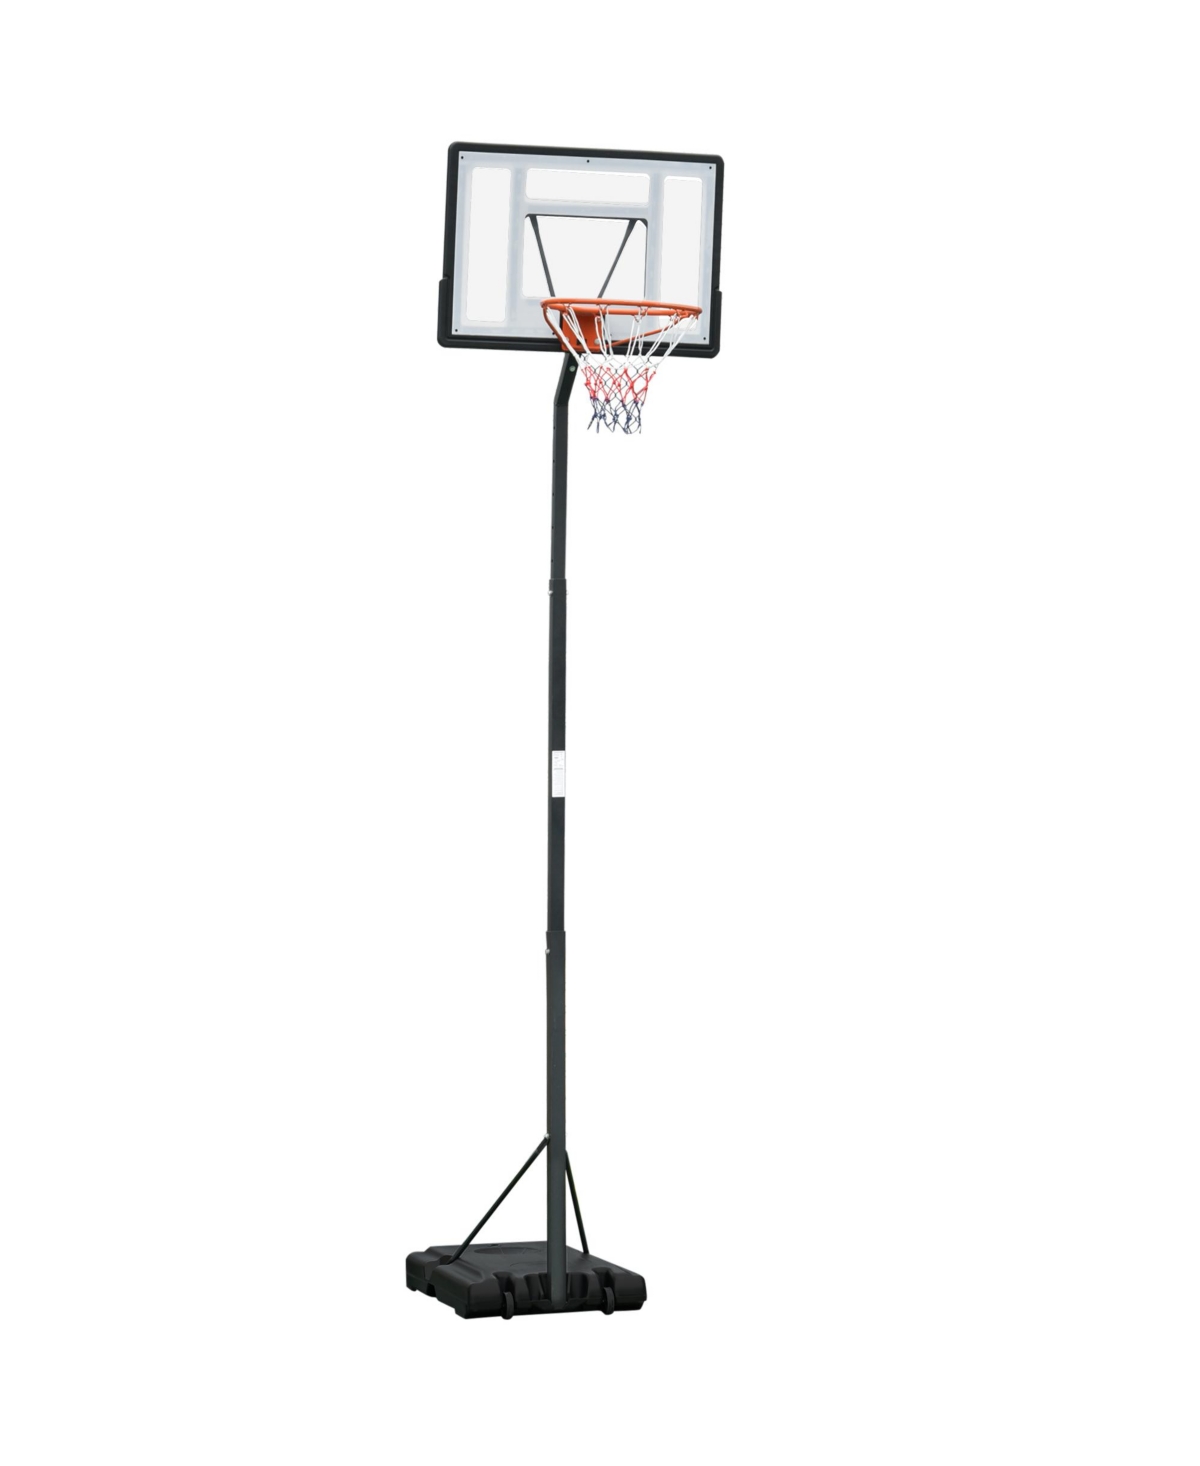 Portable Basketball Hoop System Stand with 34in Backboard, Wheels, Height Adjustable 8FT-10FT for Indoor Outdoor Use - Black